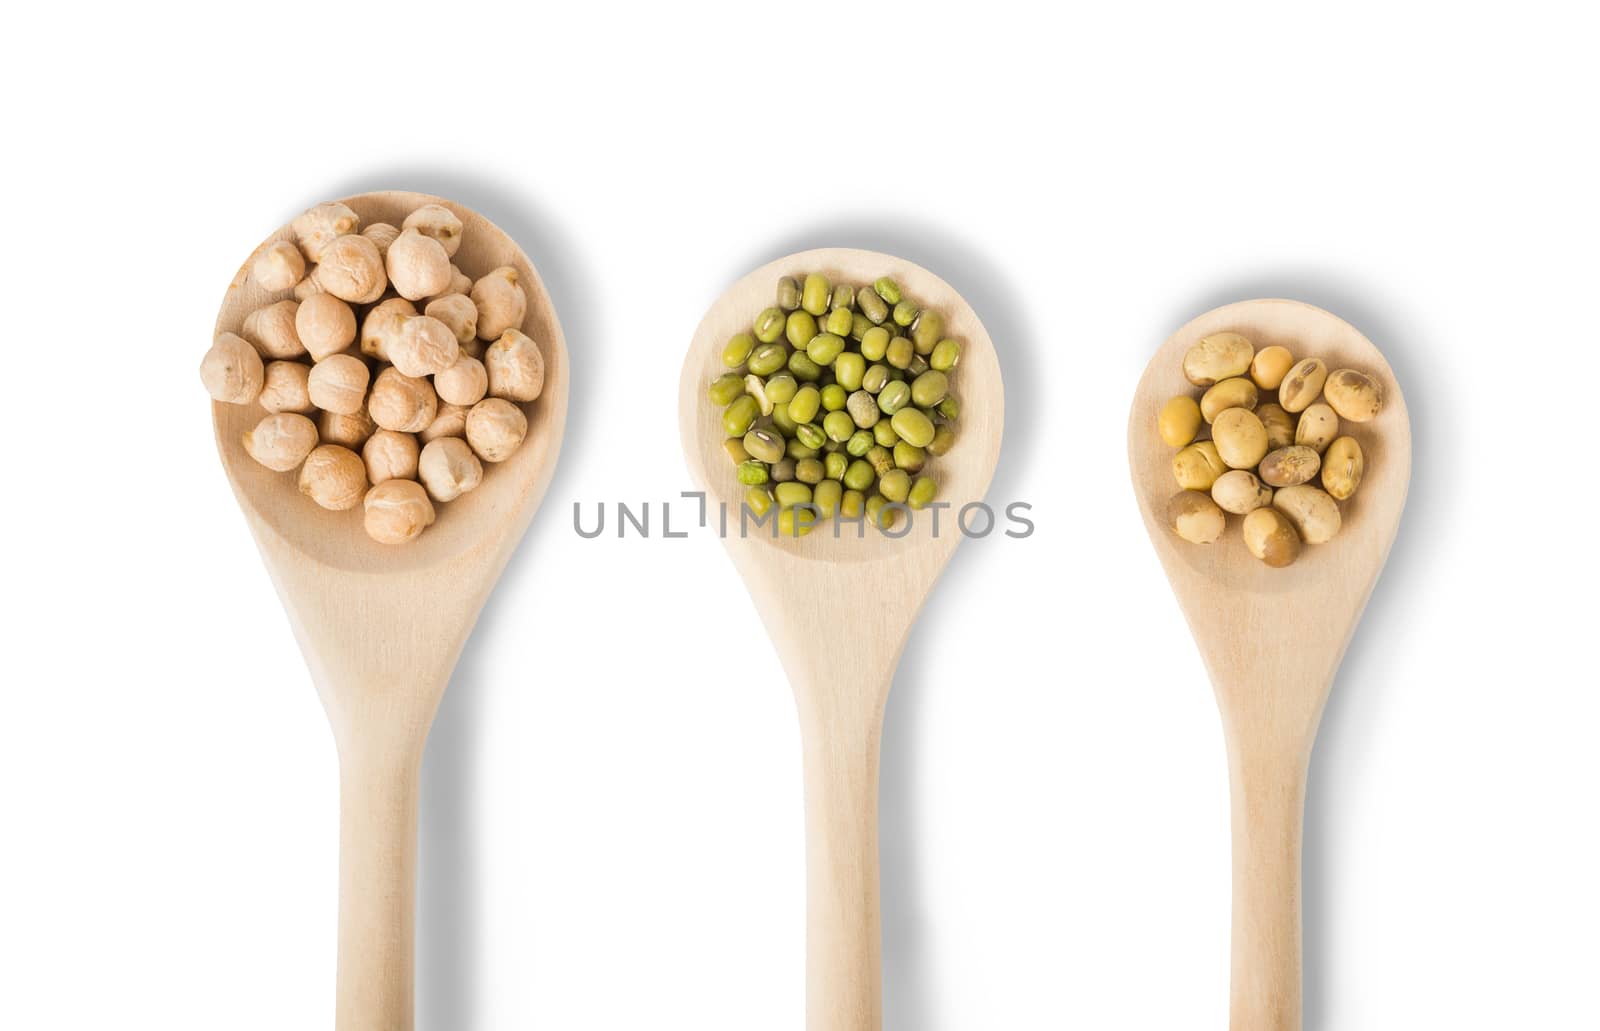 Soybeans, mung beans and chickpea  by iprachenko